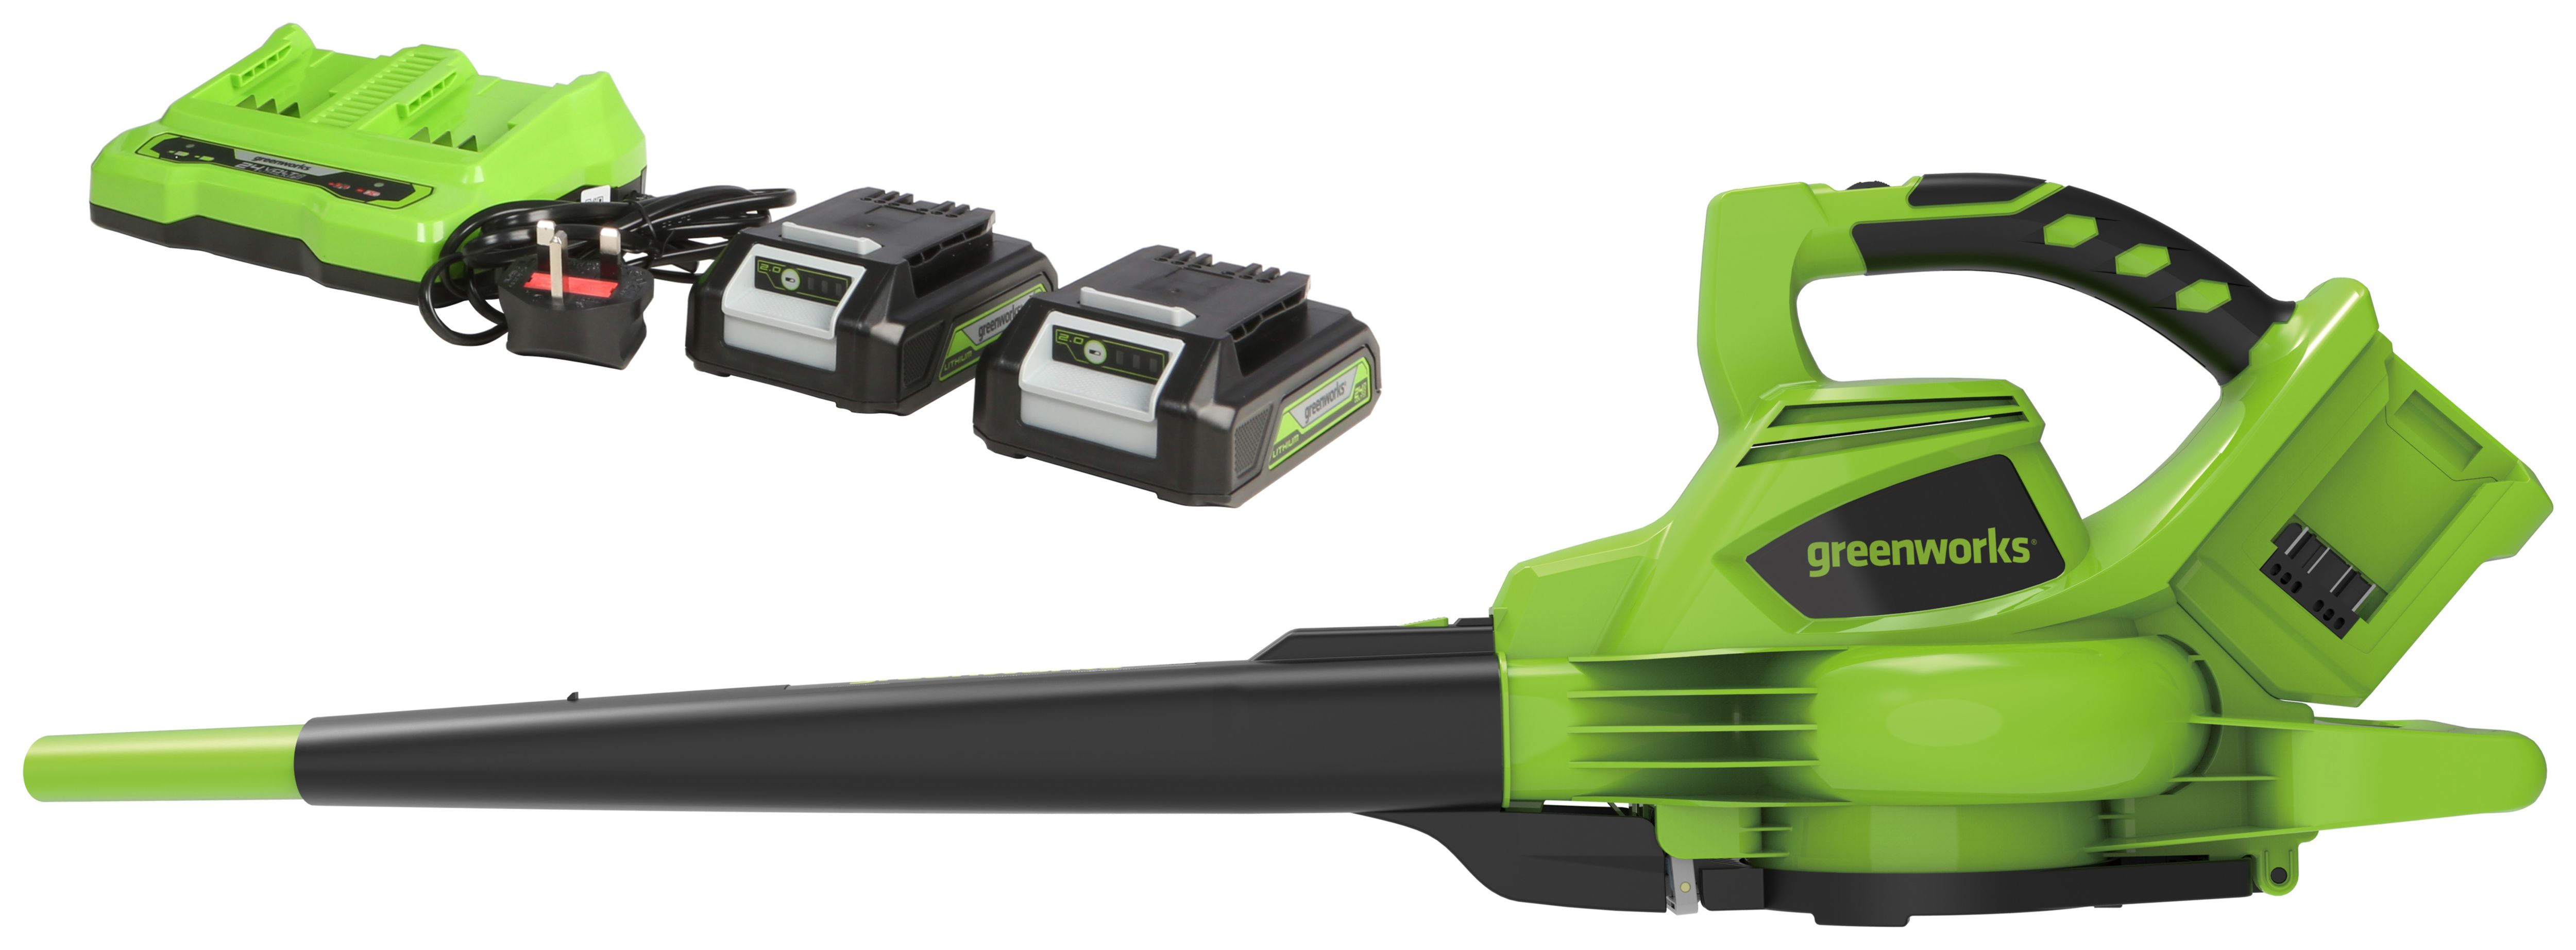 Greenworks Cordless Blow and Vac C/W 48V 2 x 24V 4Ah Batteries & Charger